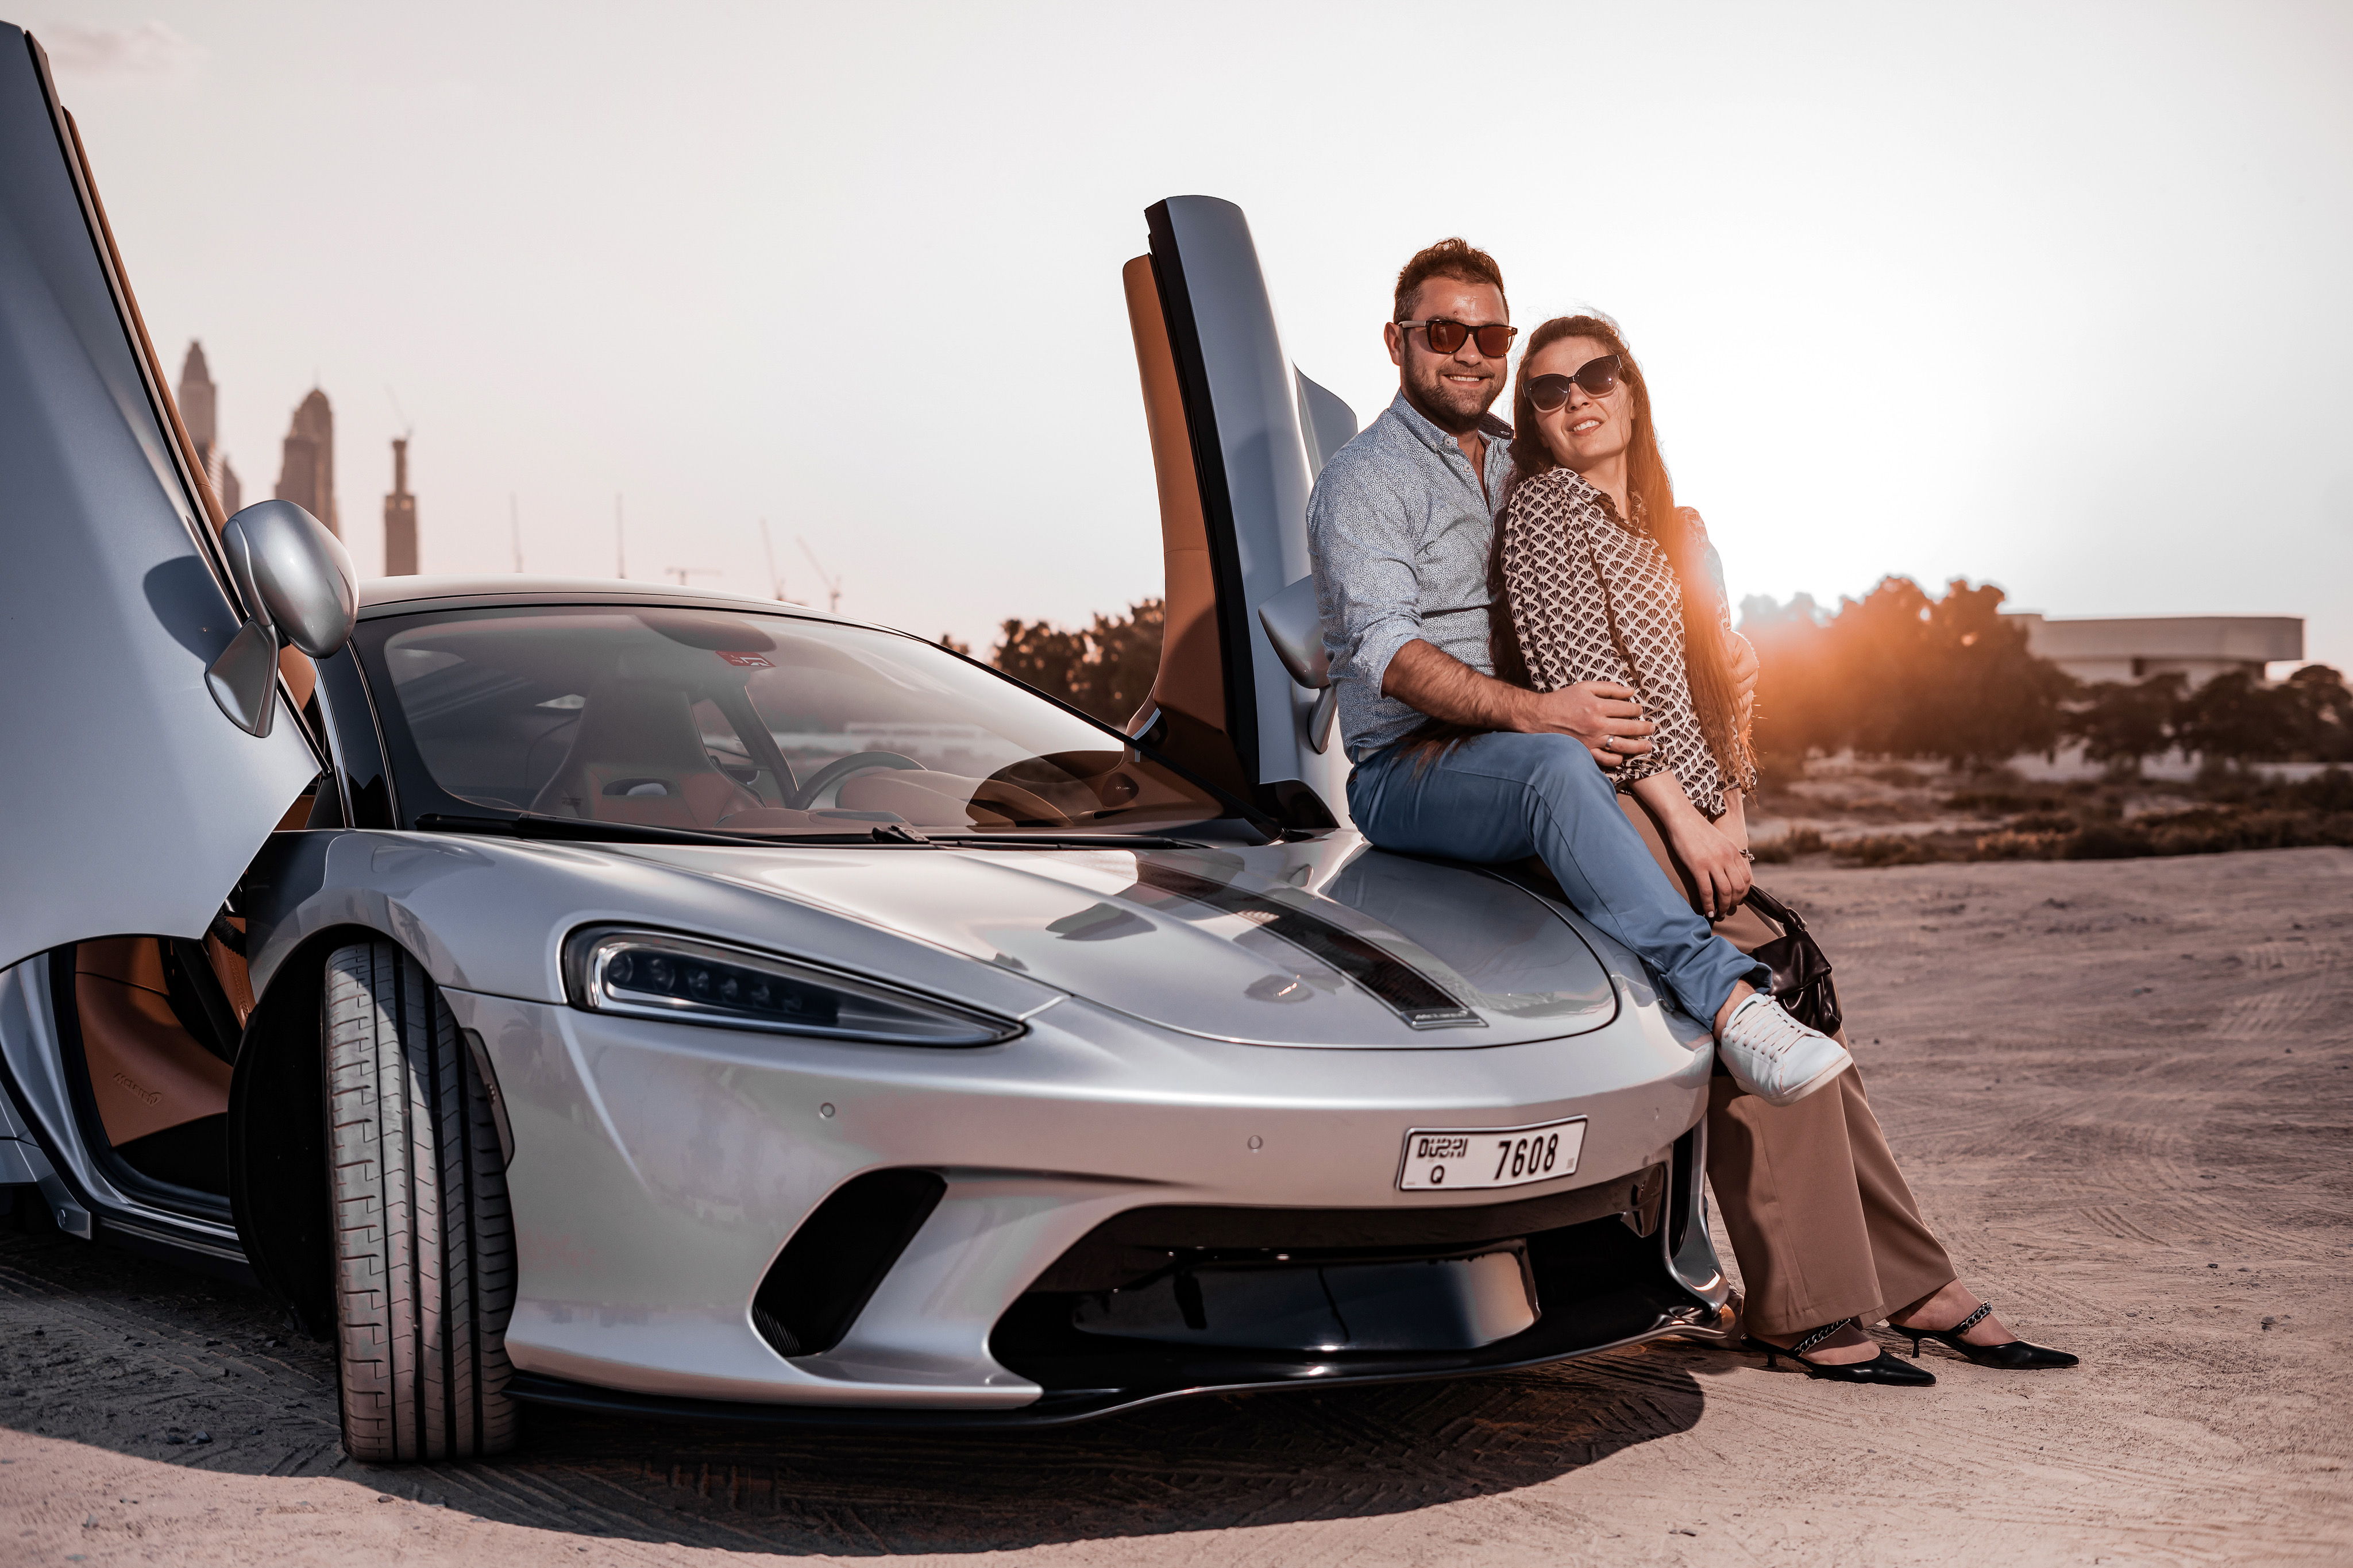 A man and woman pose next to a luxury silver sports car during a photoshoot in Dubai.